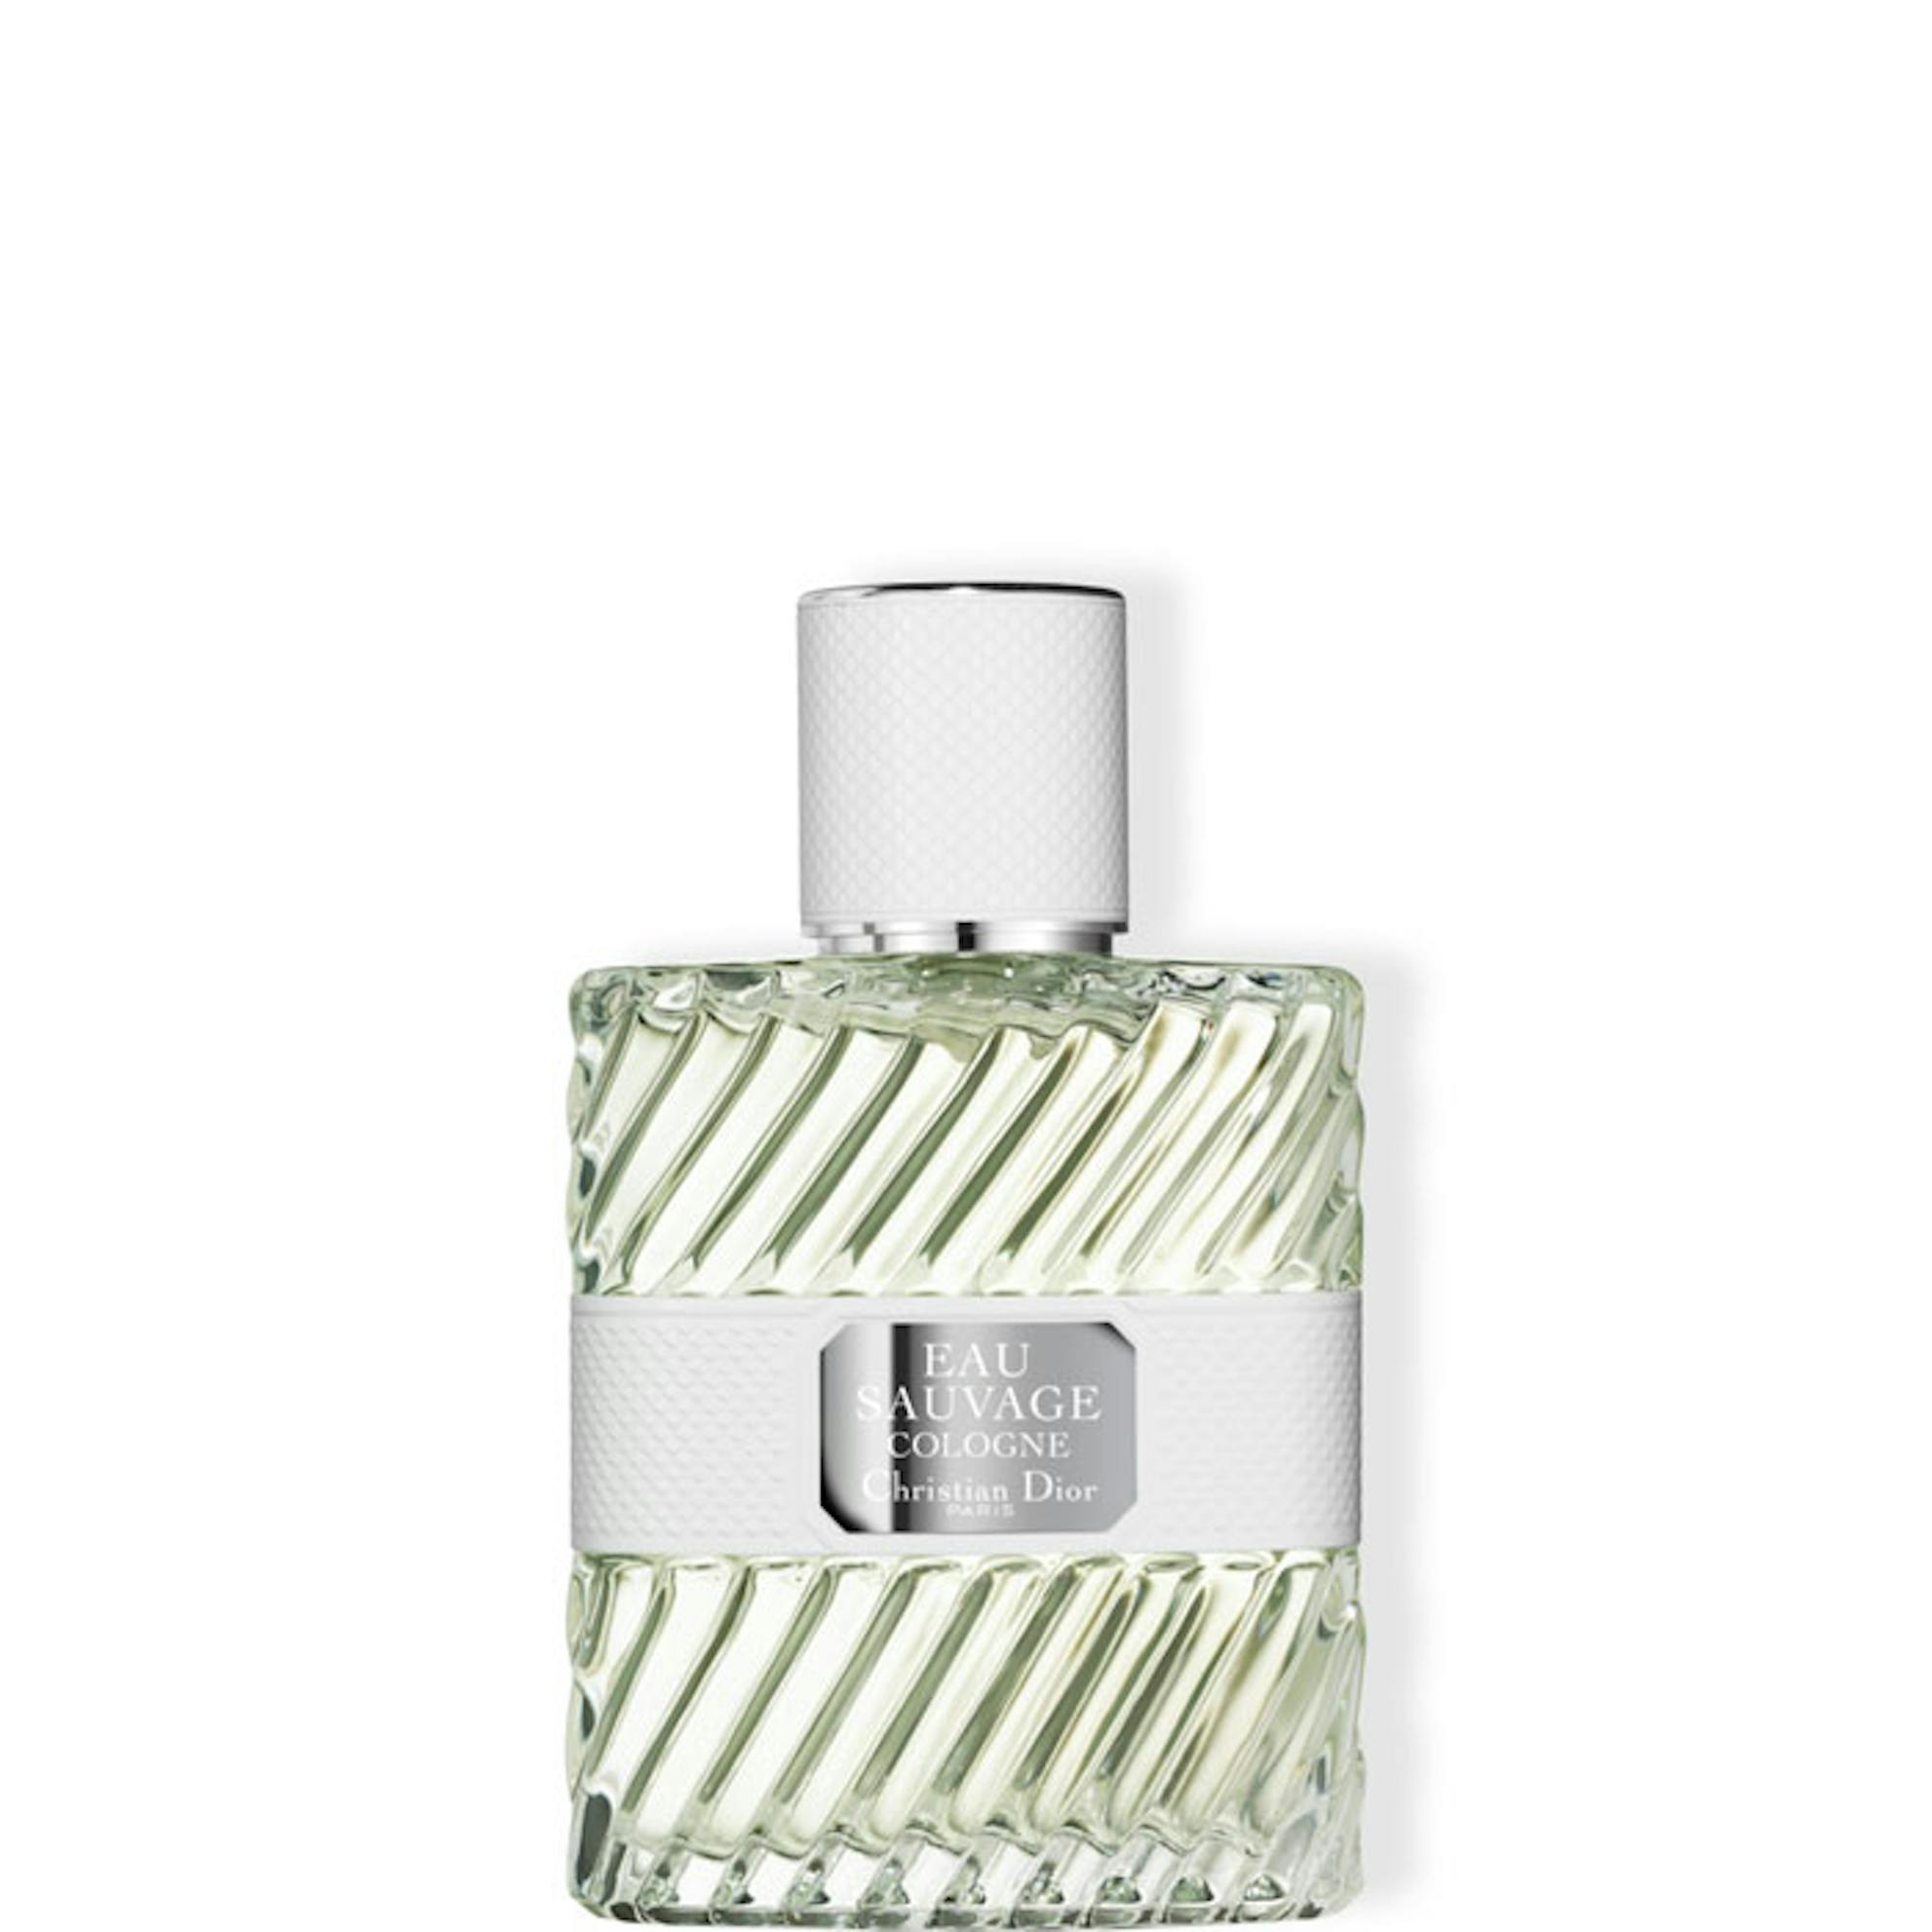 Shop Christian Dior Eau Sauvage Eau De Cologne 50ml aftershave for men  online at The Fragrance Shop. Free delivery available. Free click &  collect.